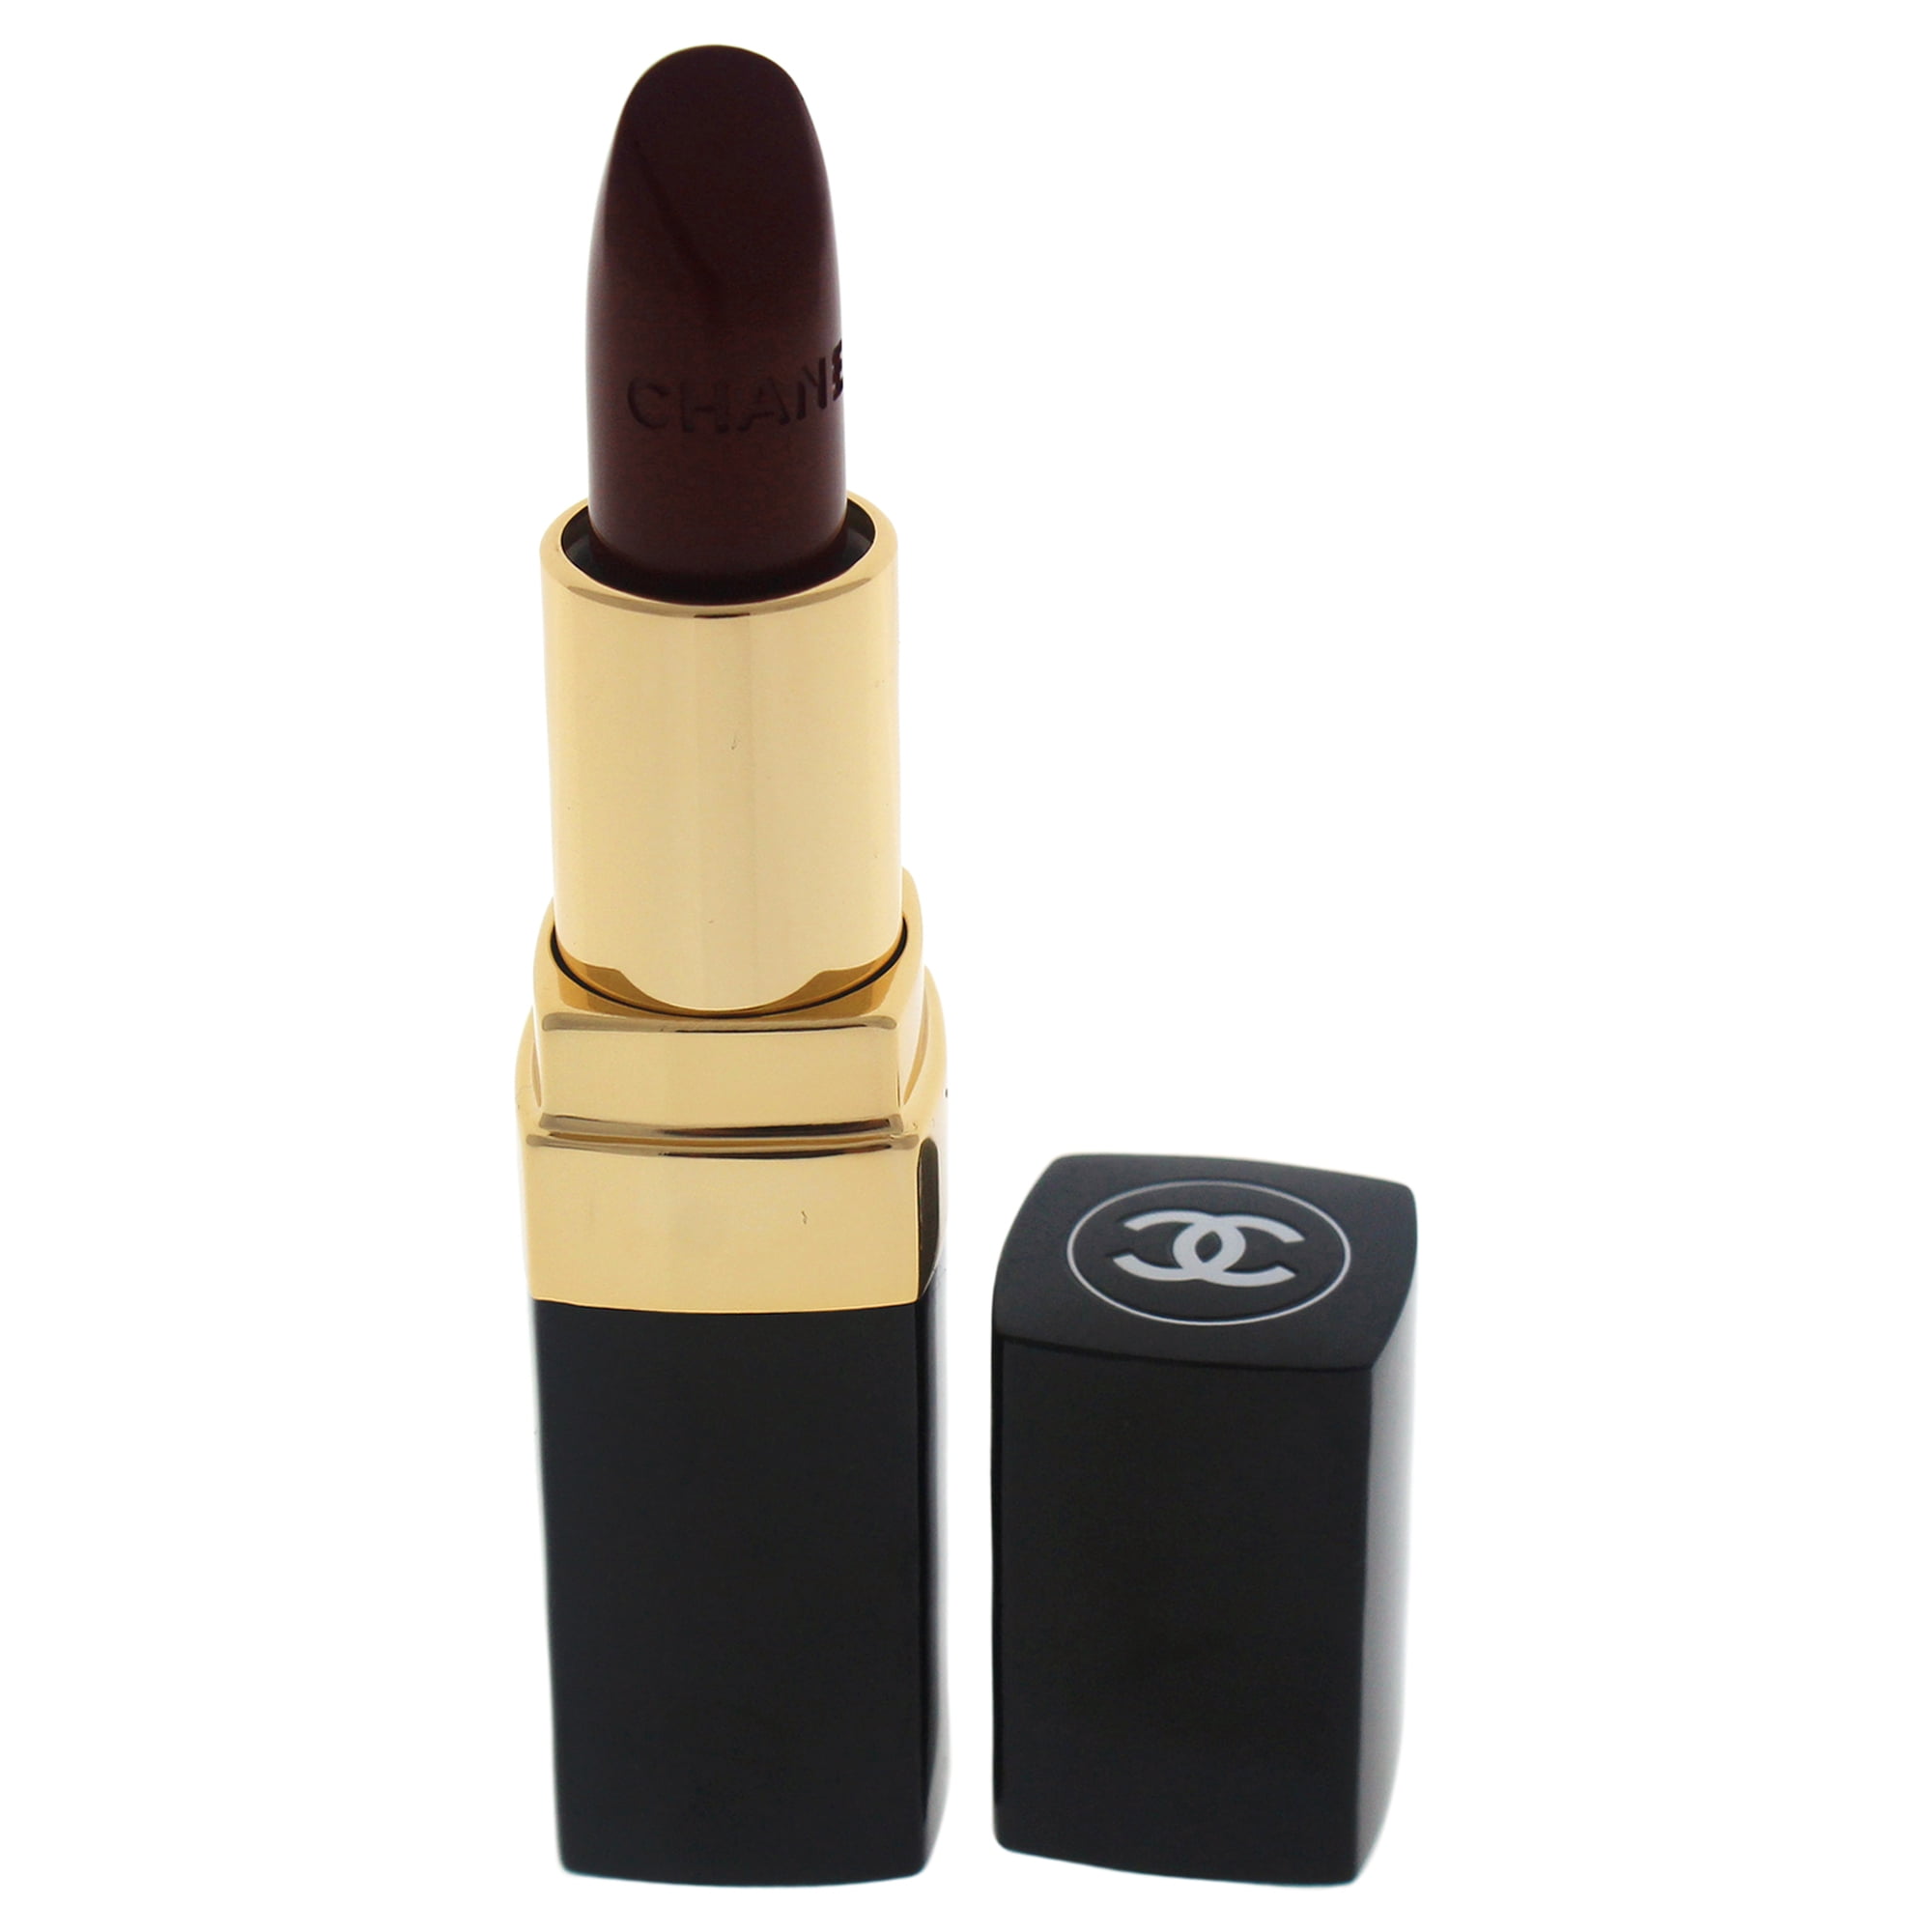 Chanel rouge coco 470 marthe, 美容＆個人護理, 指甲美容＆其他- Carousell